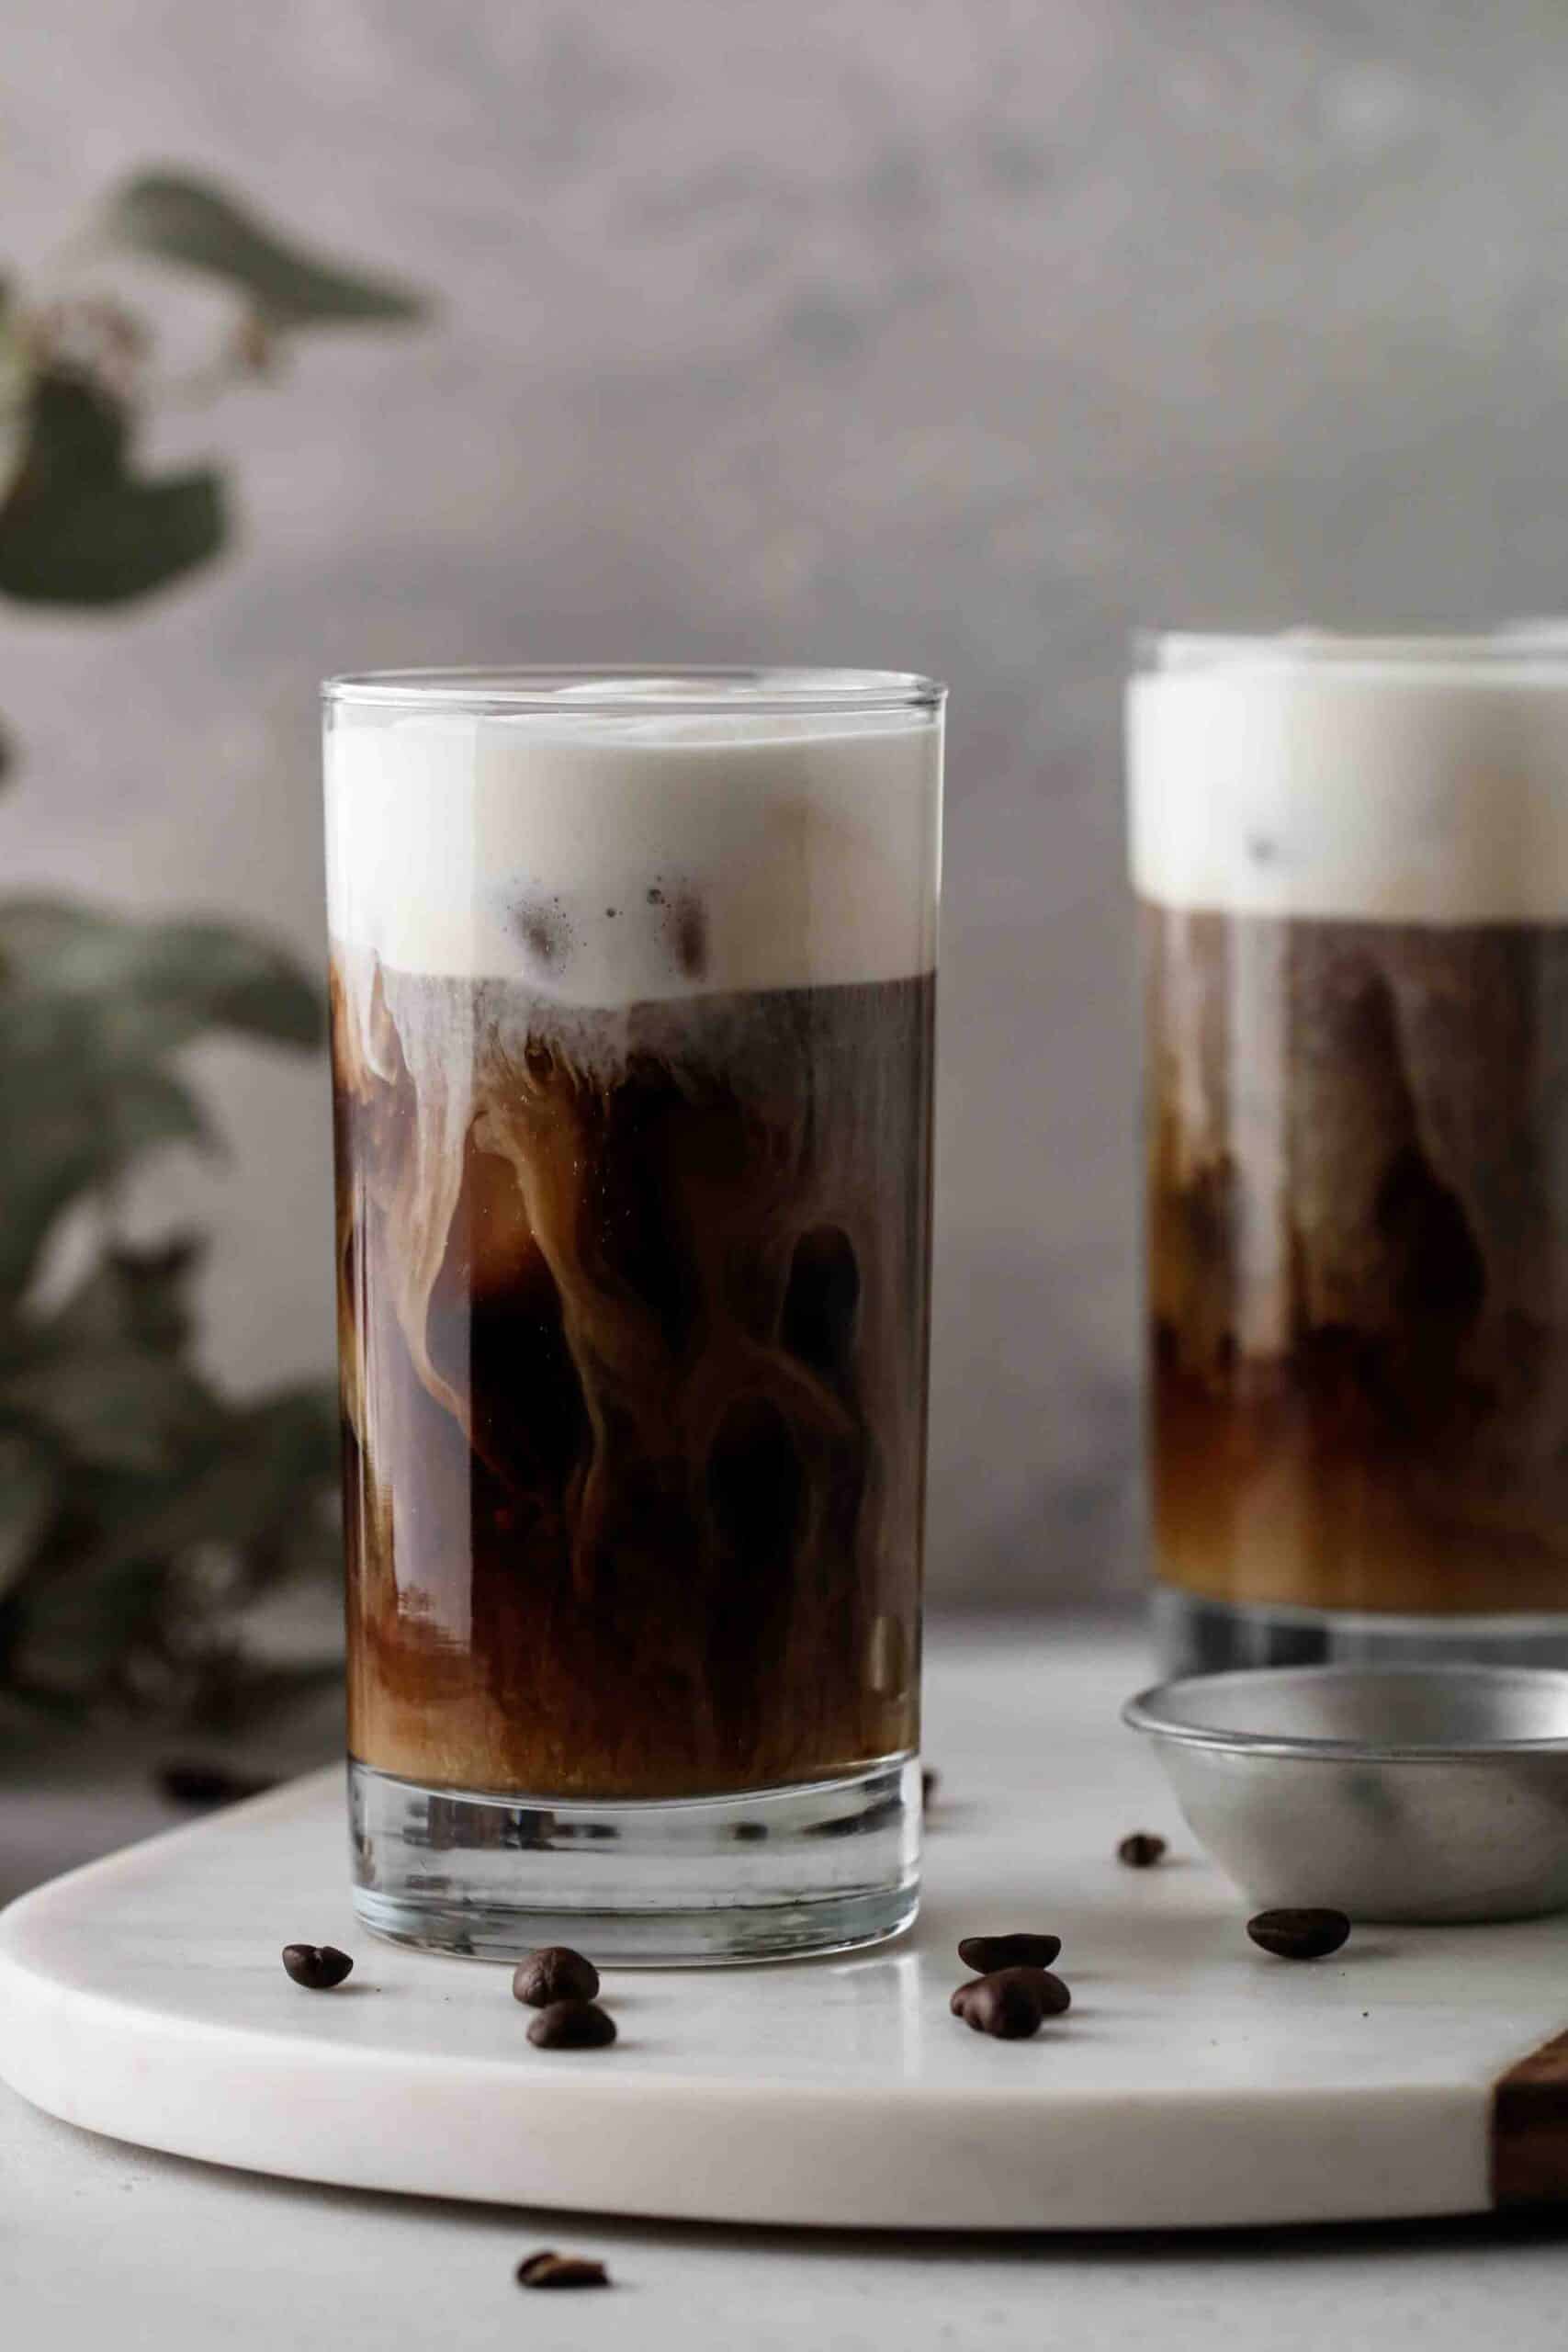 https://lifestyleofafoodie.com/wp-content/uploads/2021/03/Starbucks-salted-cream-cold-brew-cold-foam-12-of-25-scaled.jpg